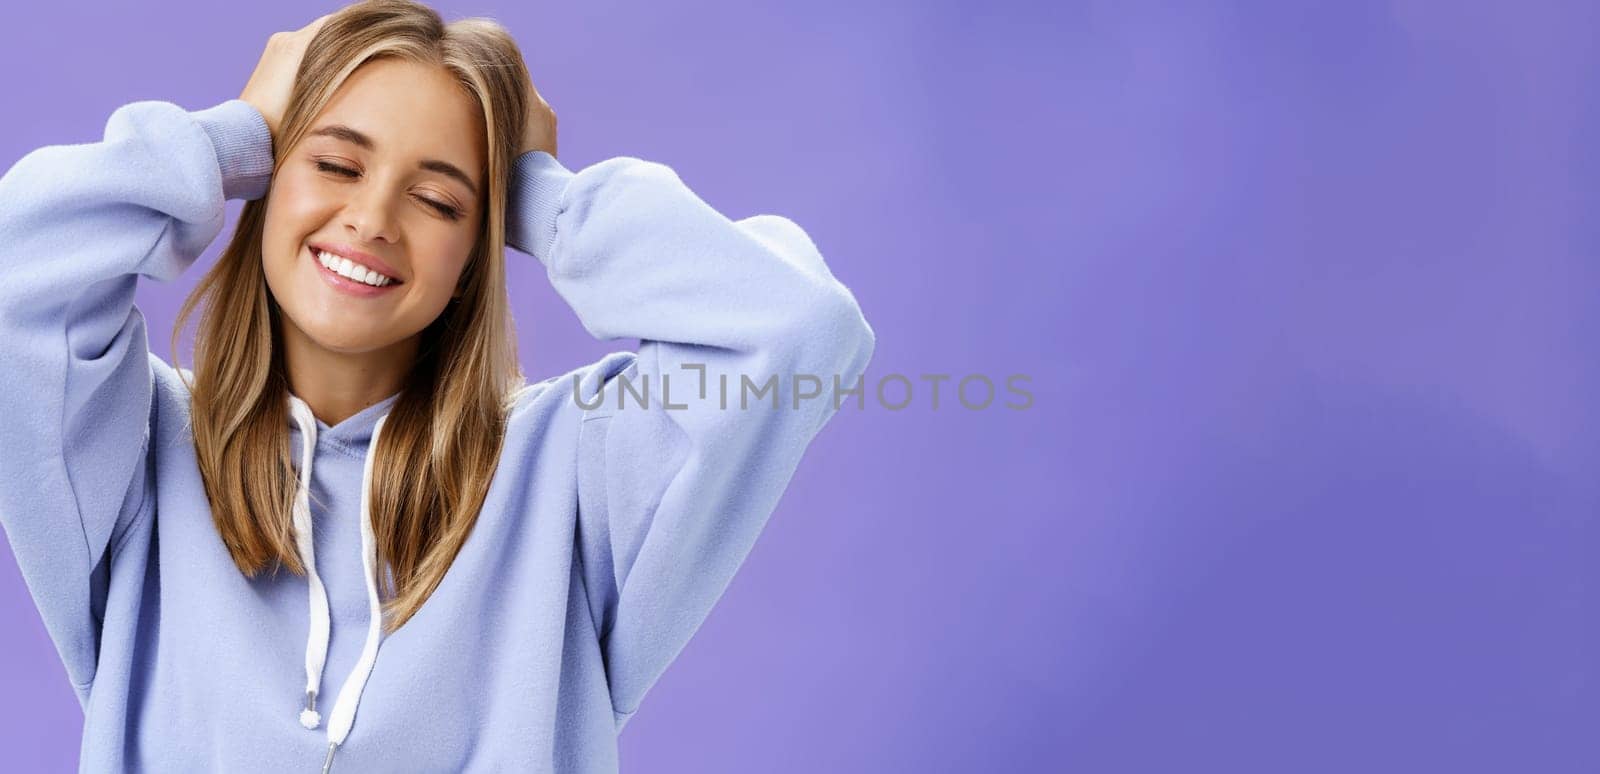 Tender relaxed charming woman with blond hair touching head joyfully smiling broadly with closed eyes daydreaming posing in trendy hoodie against purple wall finally getting rid of acne and pimples. Lifestyle.